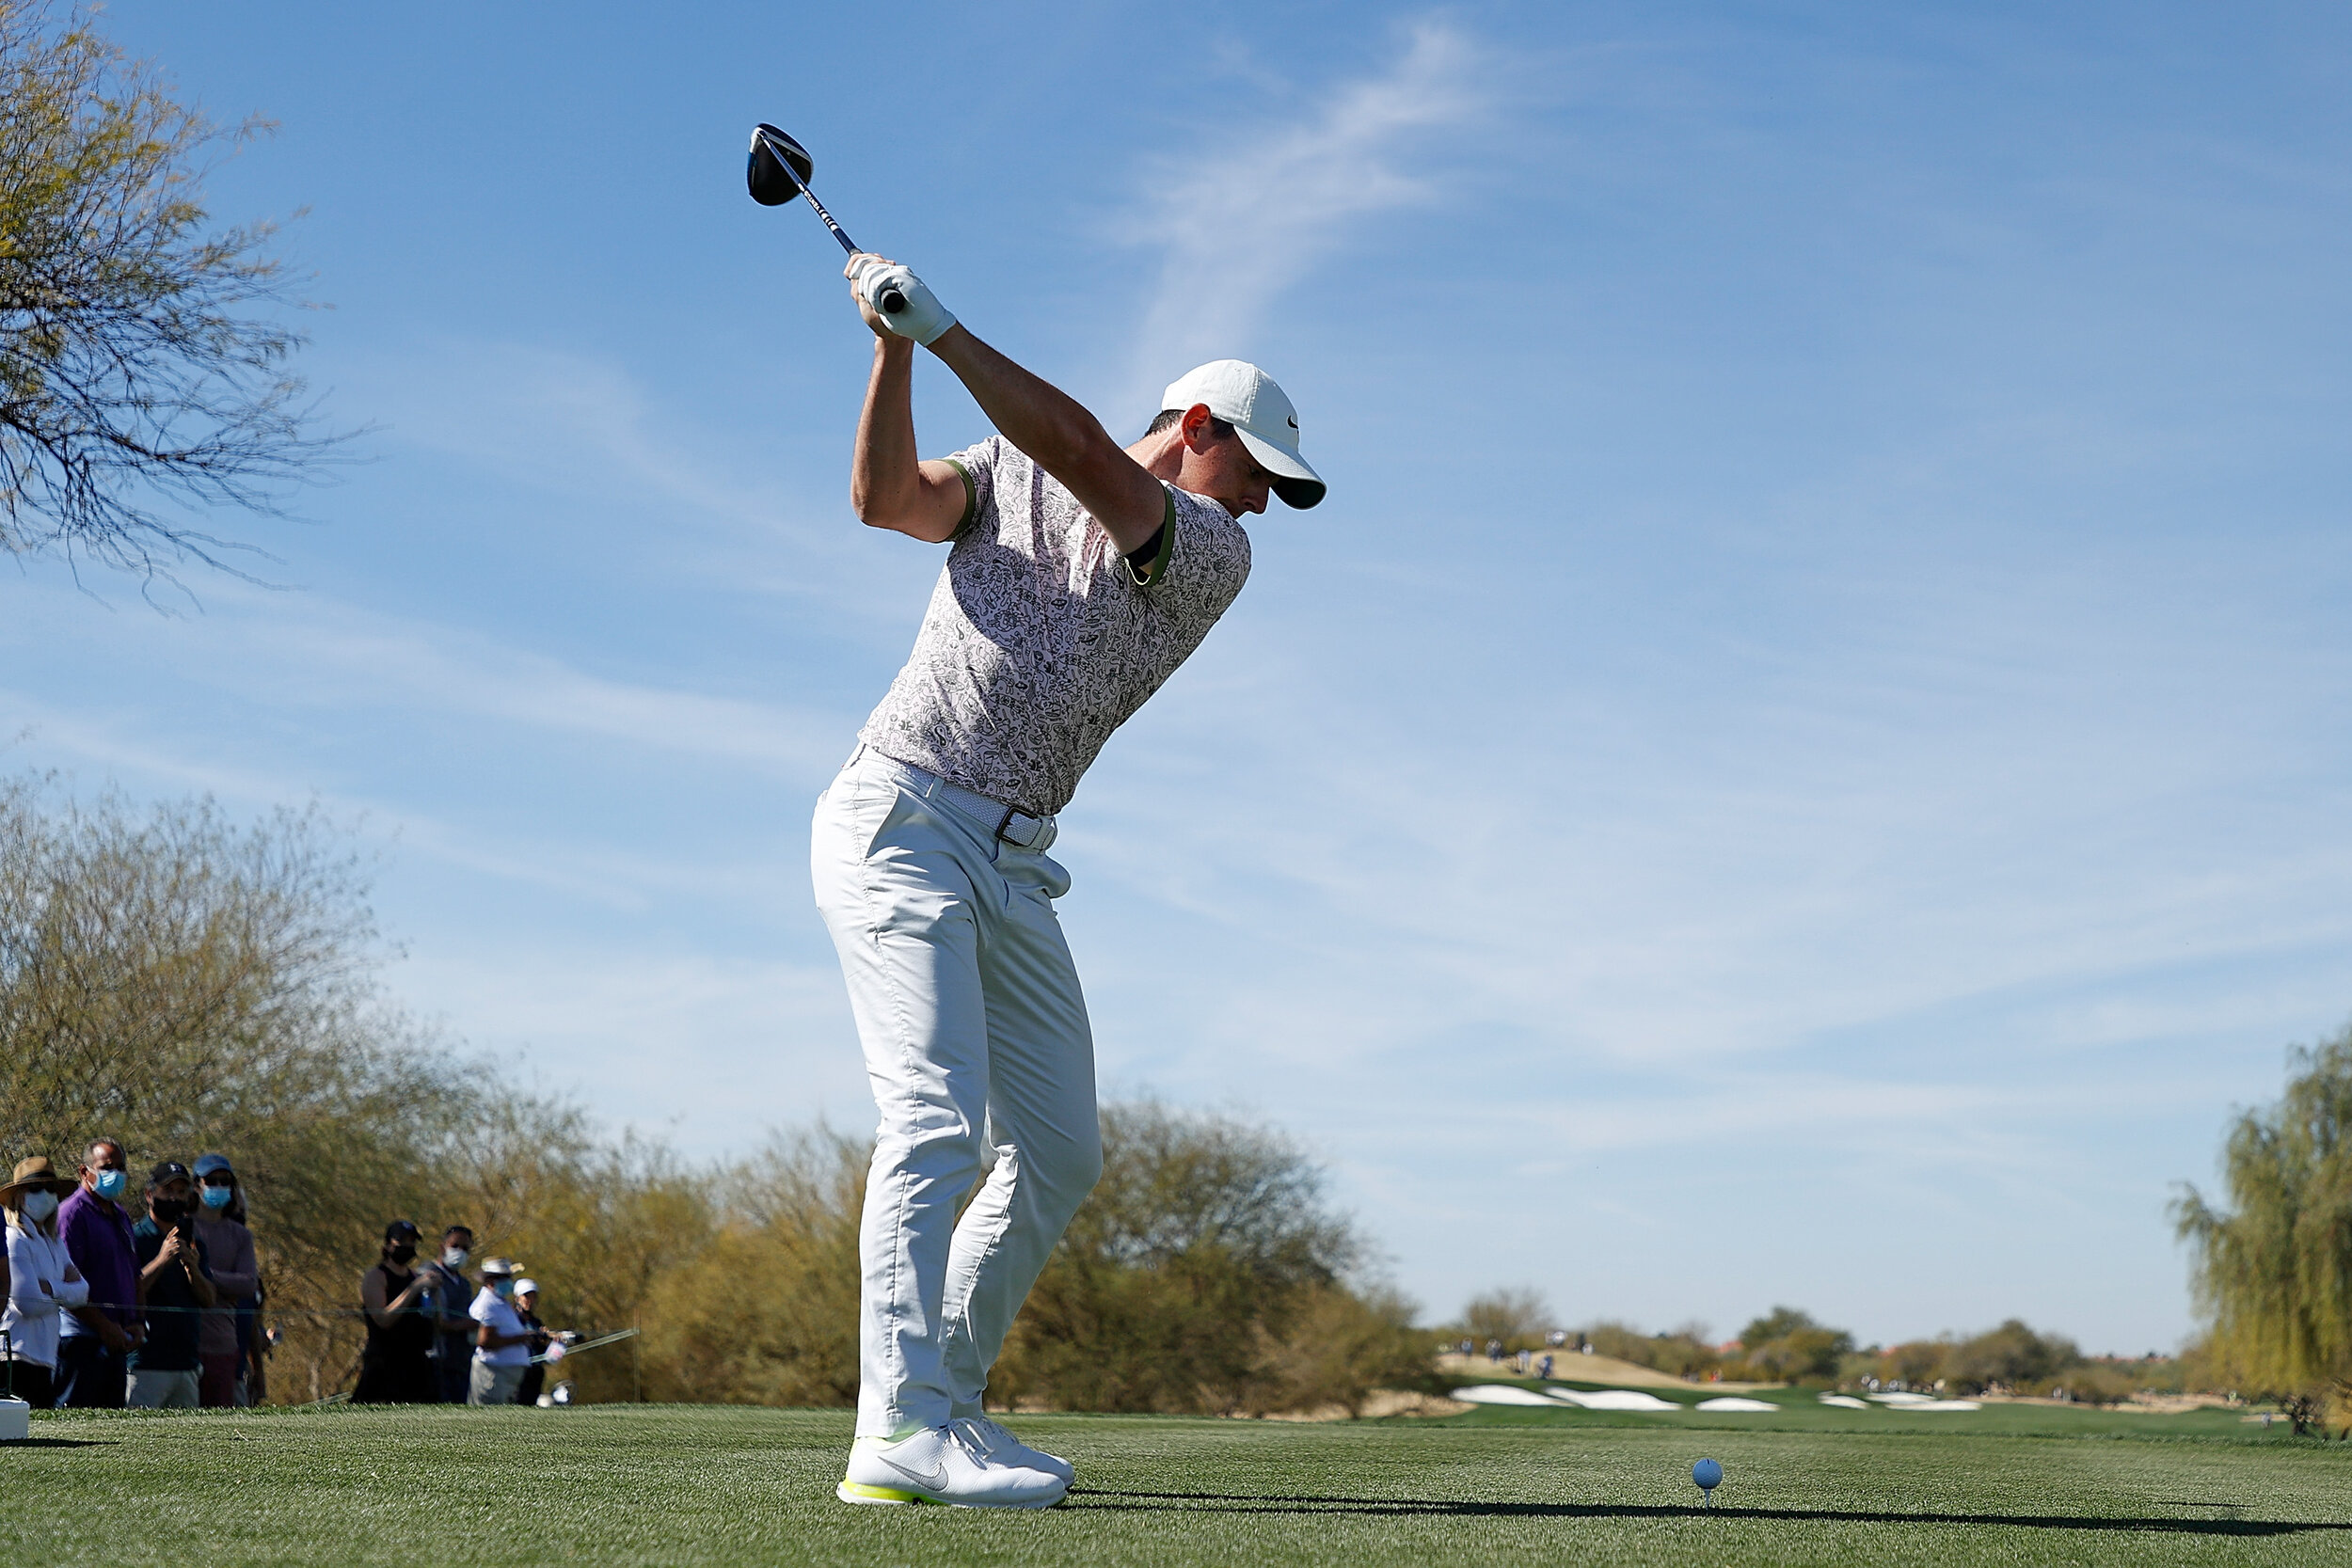  SCOTTSDALE, ARIZONA - FEBRUARY 07: Rory McIlroy of Northern Ireland hits his tee shot on the third hole during the final round of the Waste Management Phoenix Open at TPC Scottsdale on February 07, 2021 in Scottsdale, Arizona. (Photo by Christian Pe